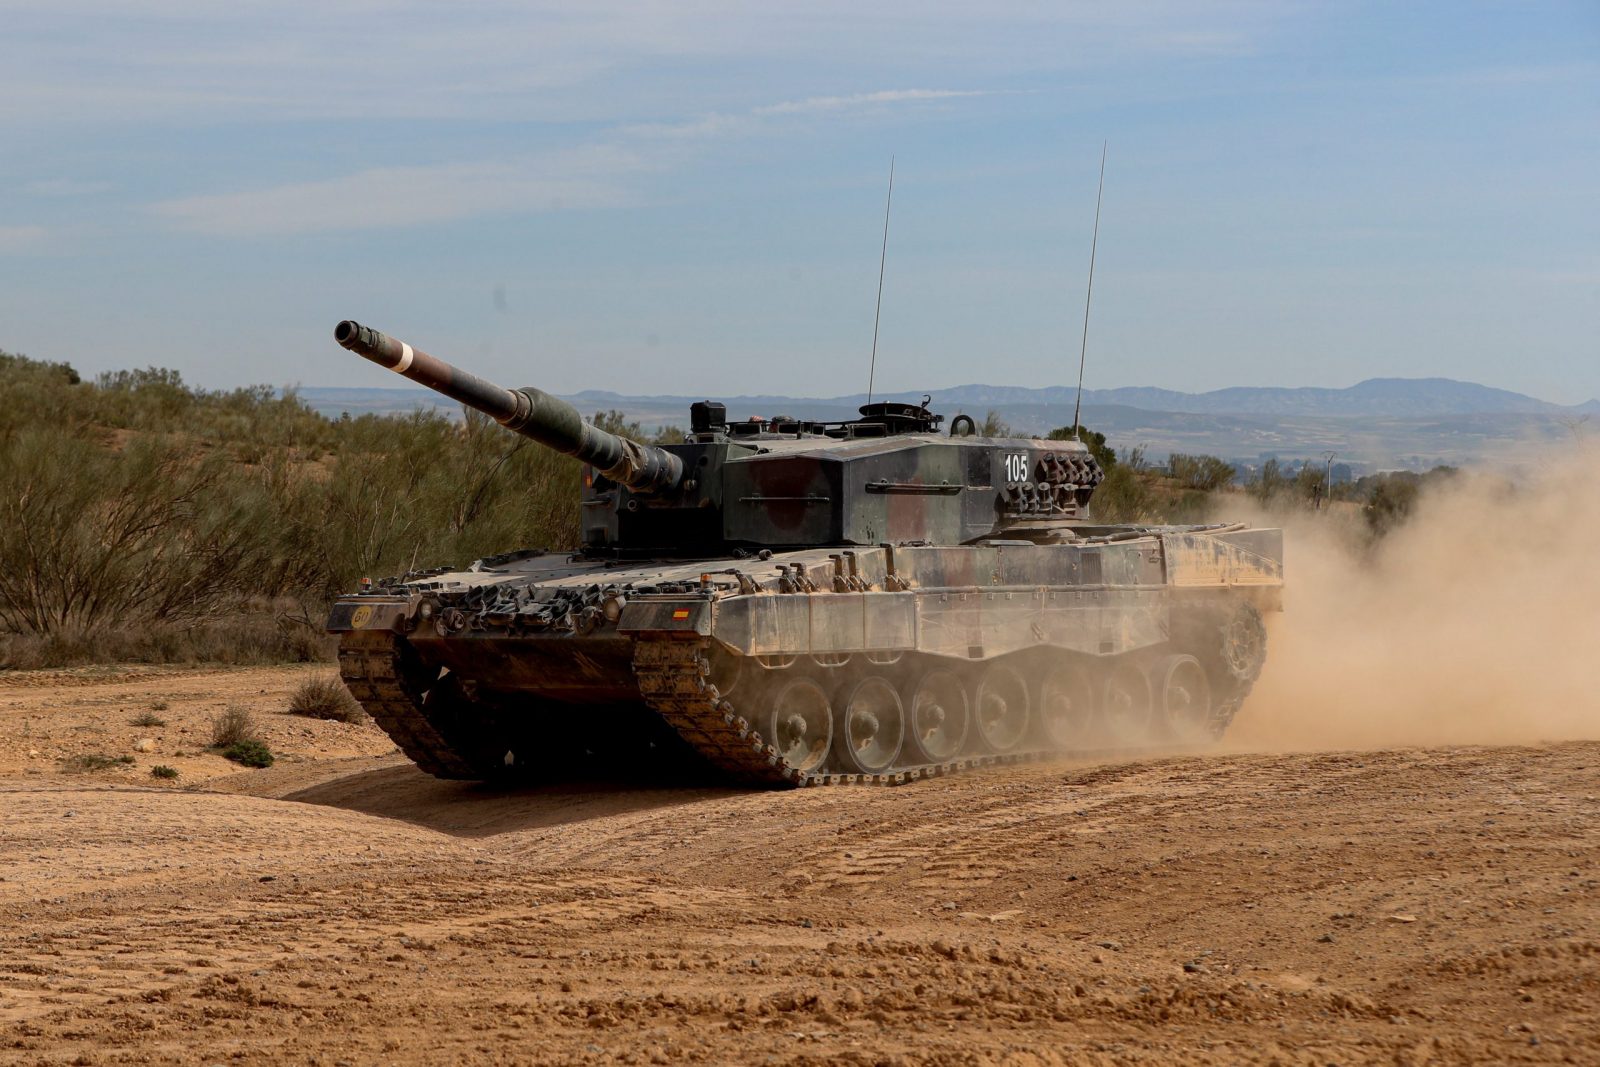 epa10520432 One of the Spanish Leopard 2A4 tanks that will be sent to Ukraine is maneuvered during a training with Ukrainian soldiers at the San Gregorio military base in Zaragoza, Spain, 13 March 2023. According to Spain's Defence Minister Margarita Robles, Spain will send a first shipment of six Leopard 2A4 tanks and plans to send more to Ukraine while they are also training 55 Ukrainian soldiers, including 40 in the handling of the tanks as crew and others in the tanks' maintenance.  EPA/Javier Cebollada